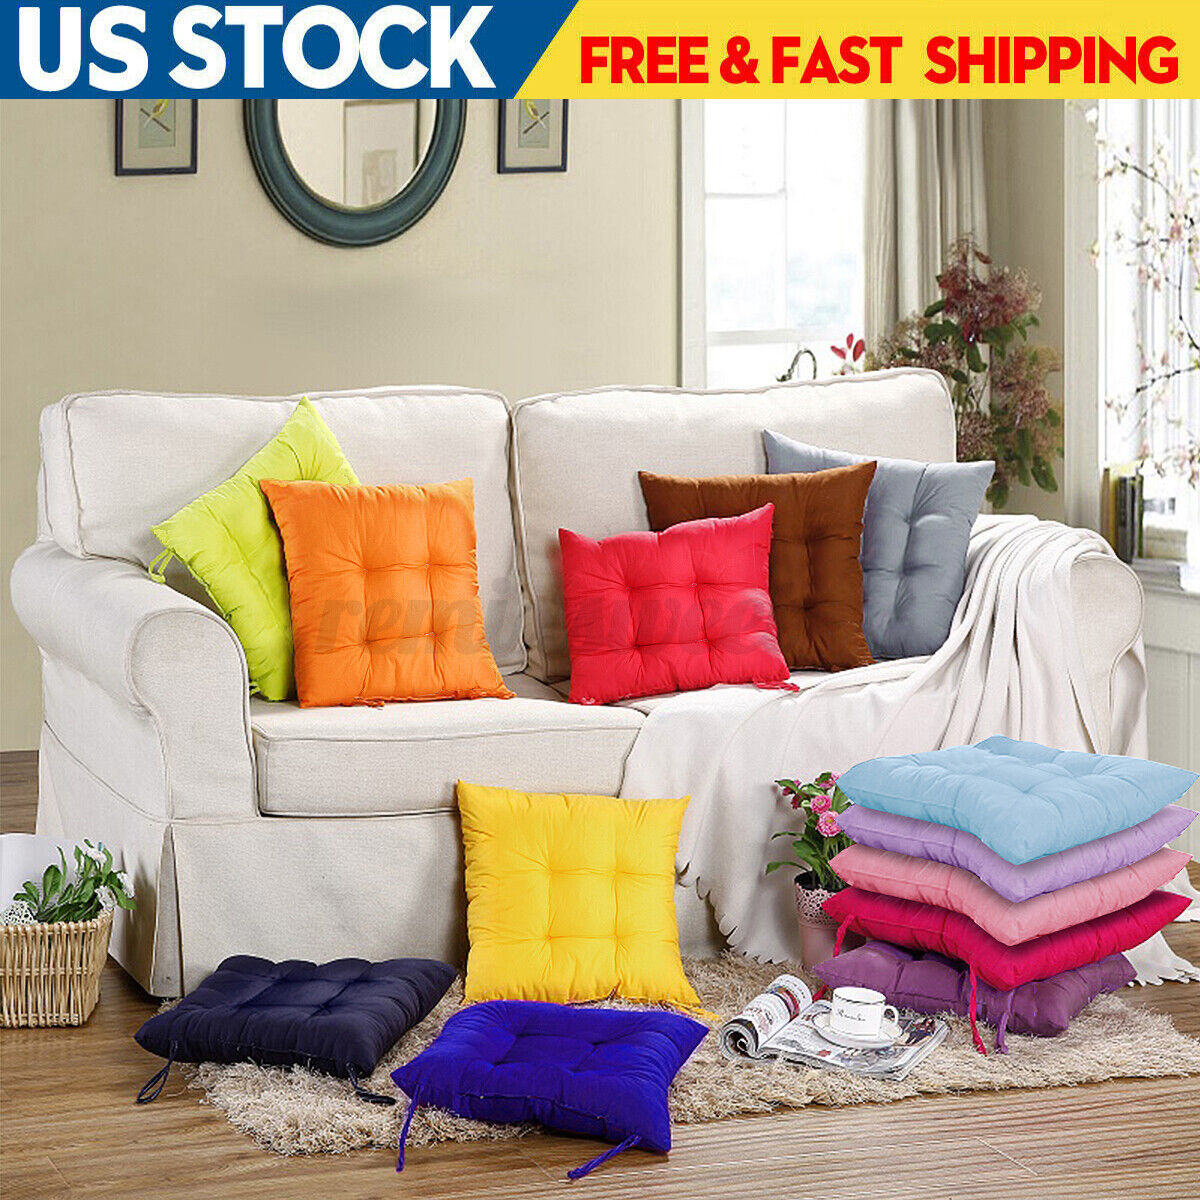 Indoor Outdoor Dining Garden Patio Soft, Home Goods Kitchen Chair Cushions